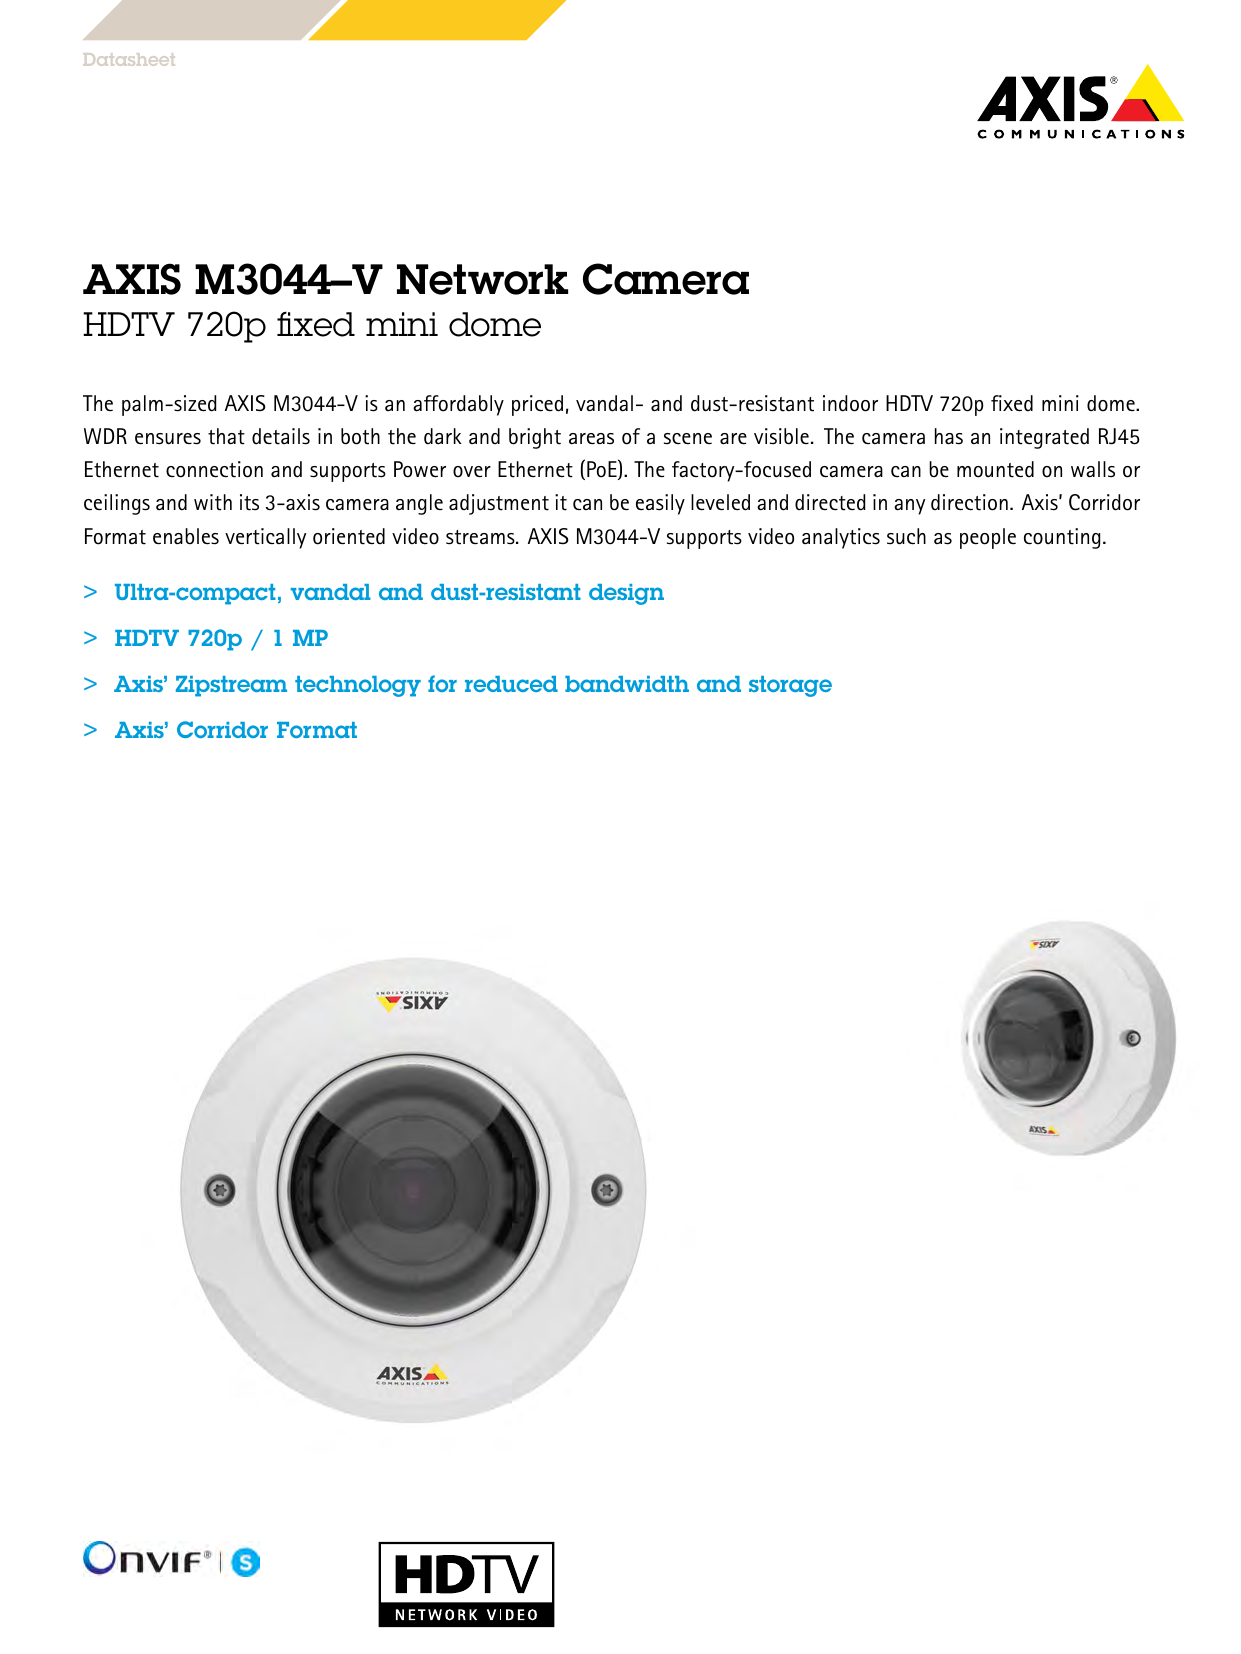 Axis M3044-V Fixed Dome Network Camera 